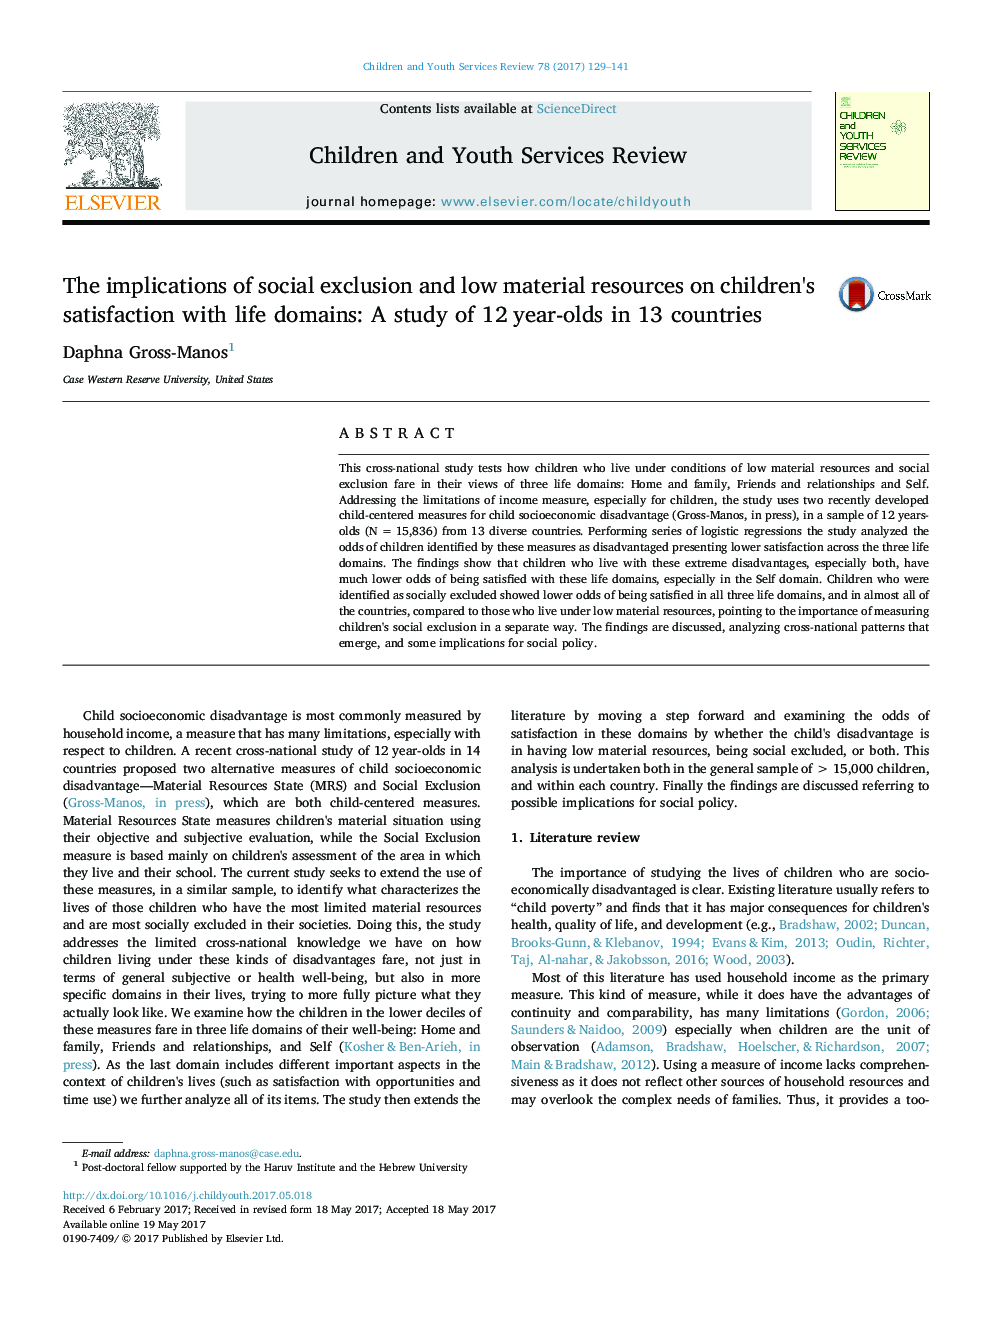 The implications of social exclusion and low material resources on children's satisfaction with life domains: A study of 12Â year-olds in 13 countries